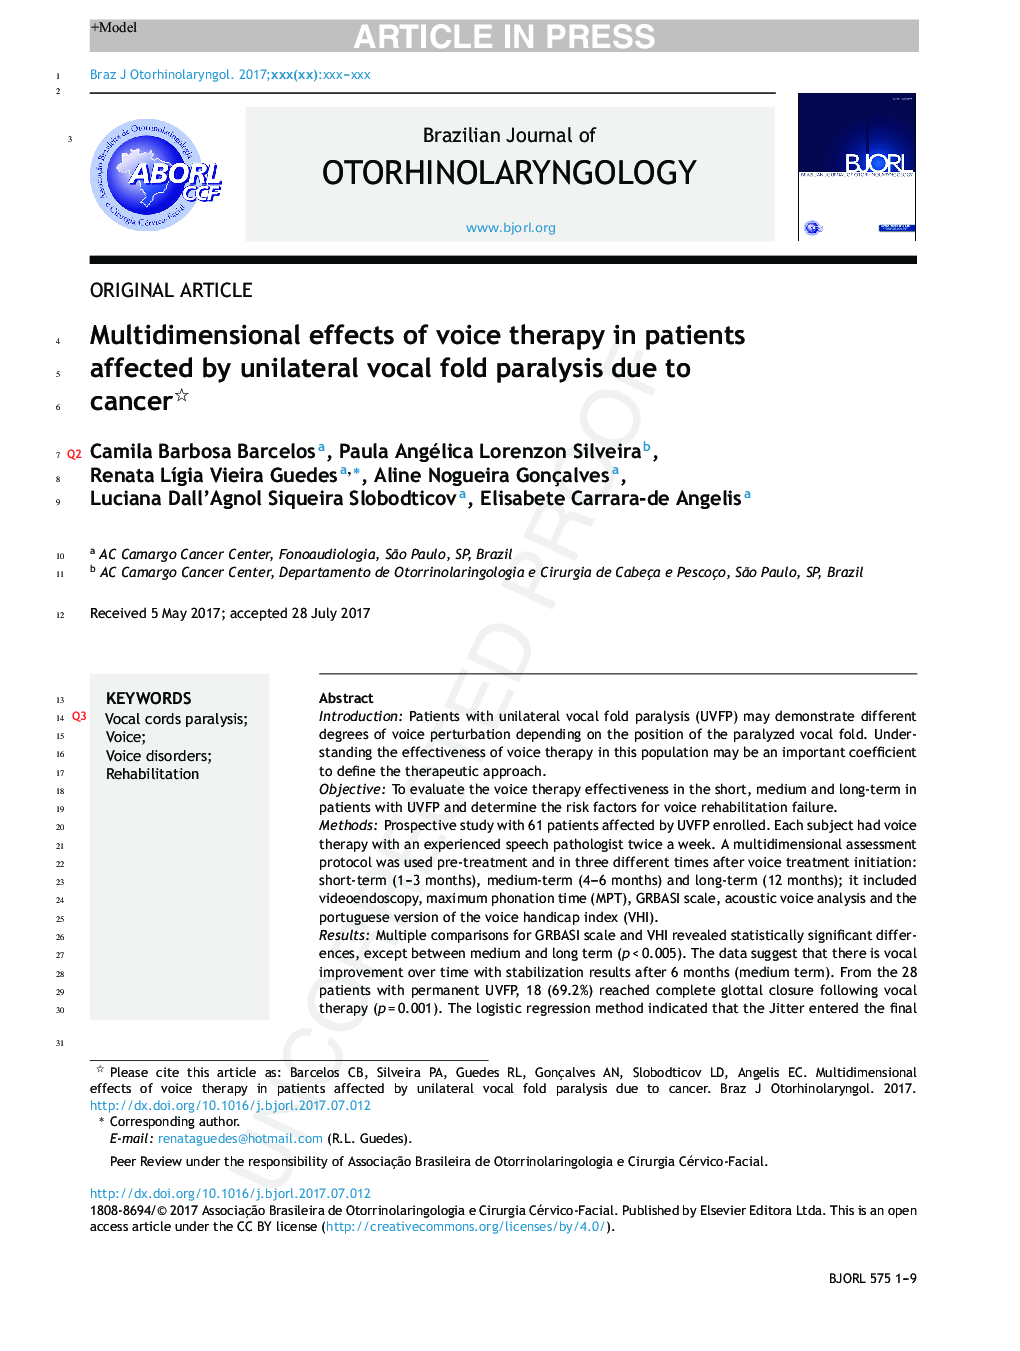 Multidimensional effects of voice therapy in patients affected by unilateral vocal fold paralysis due to cancer